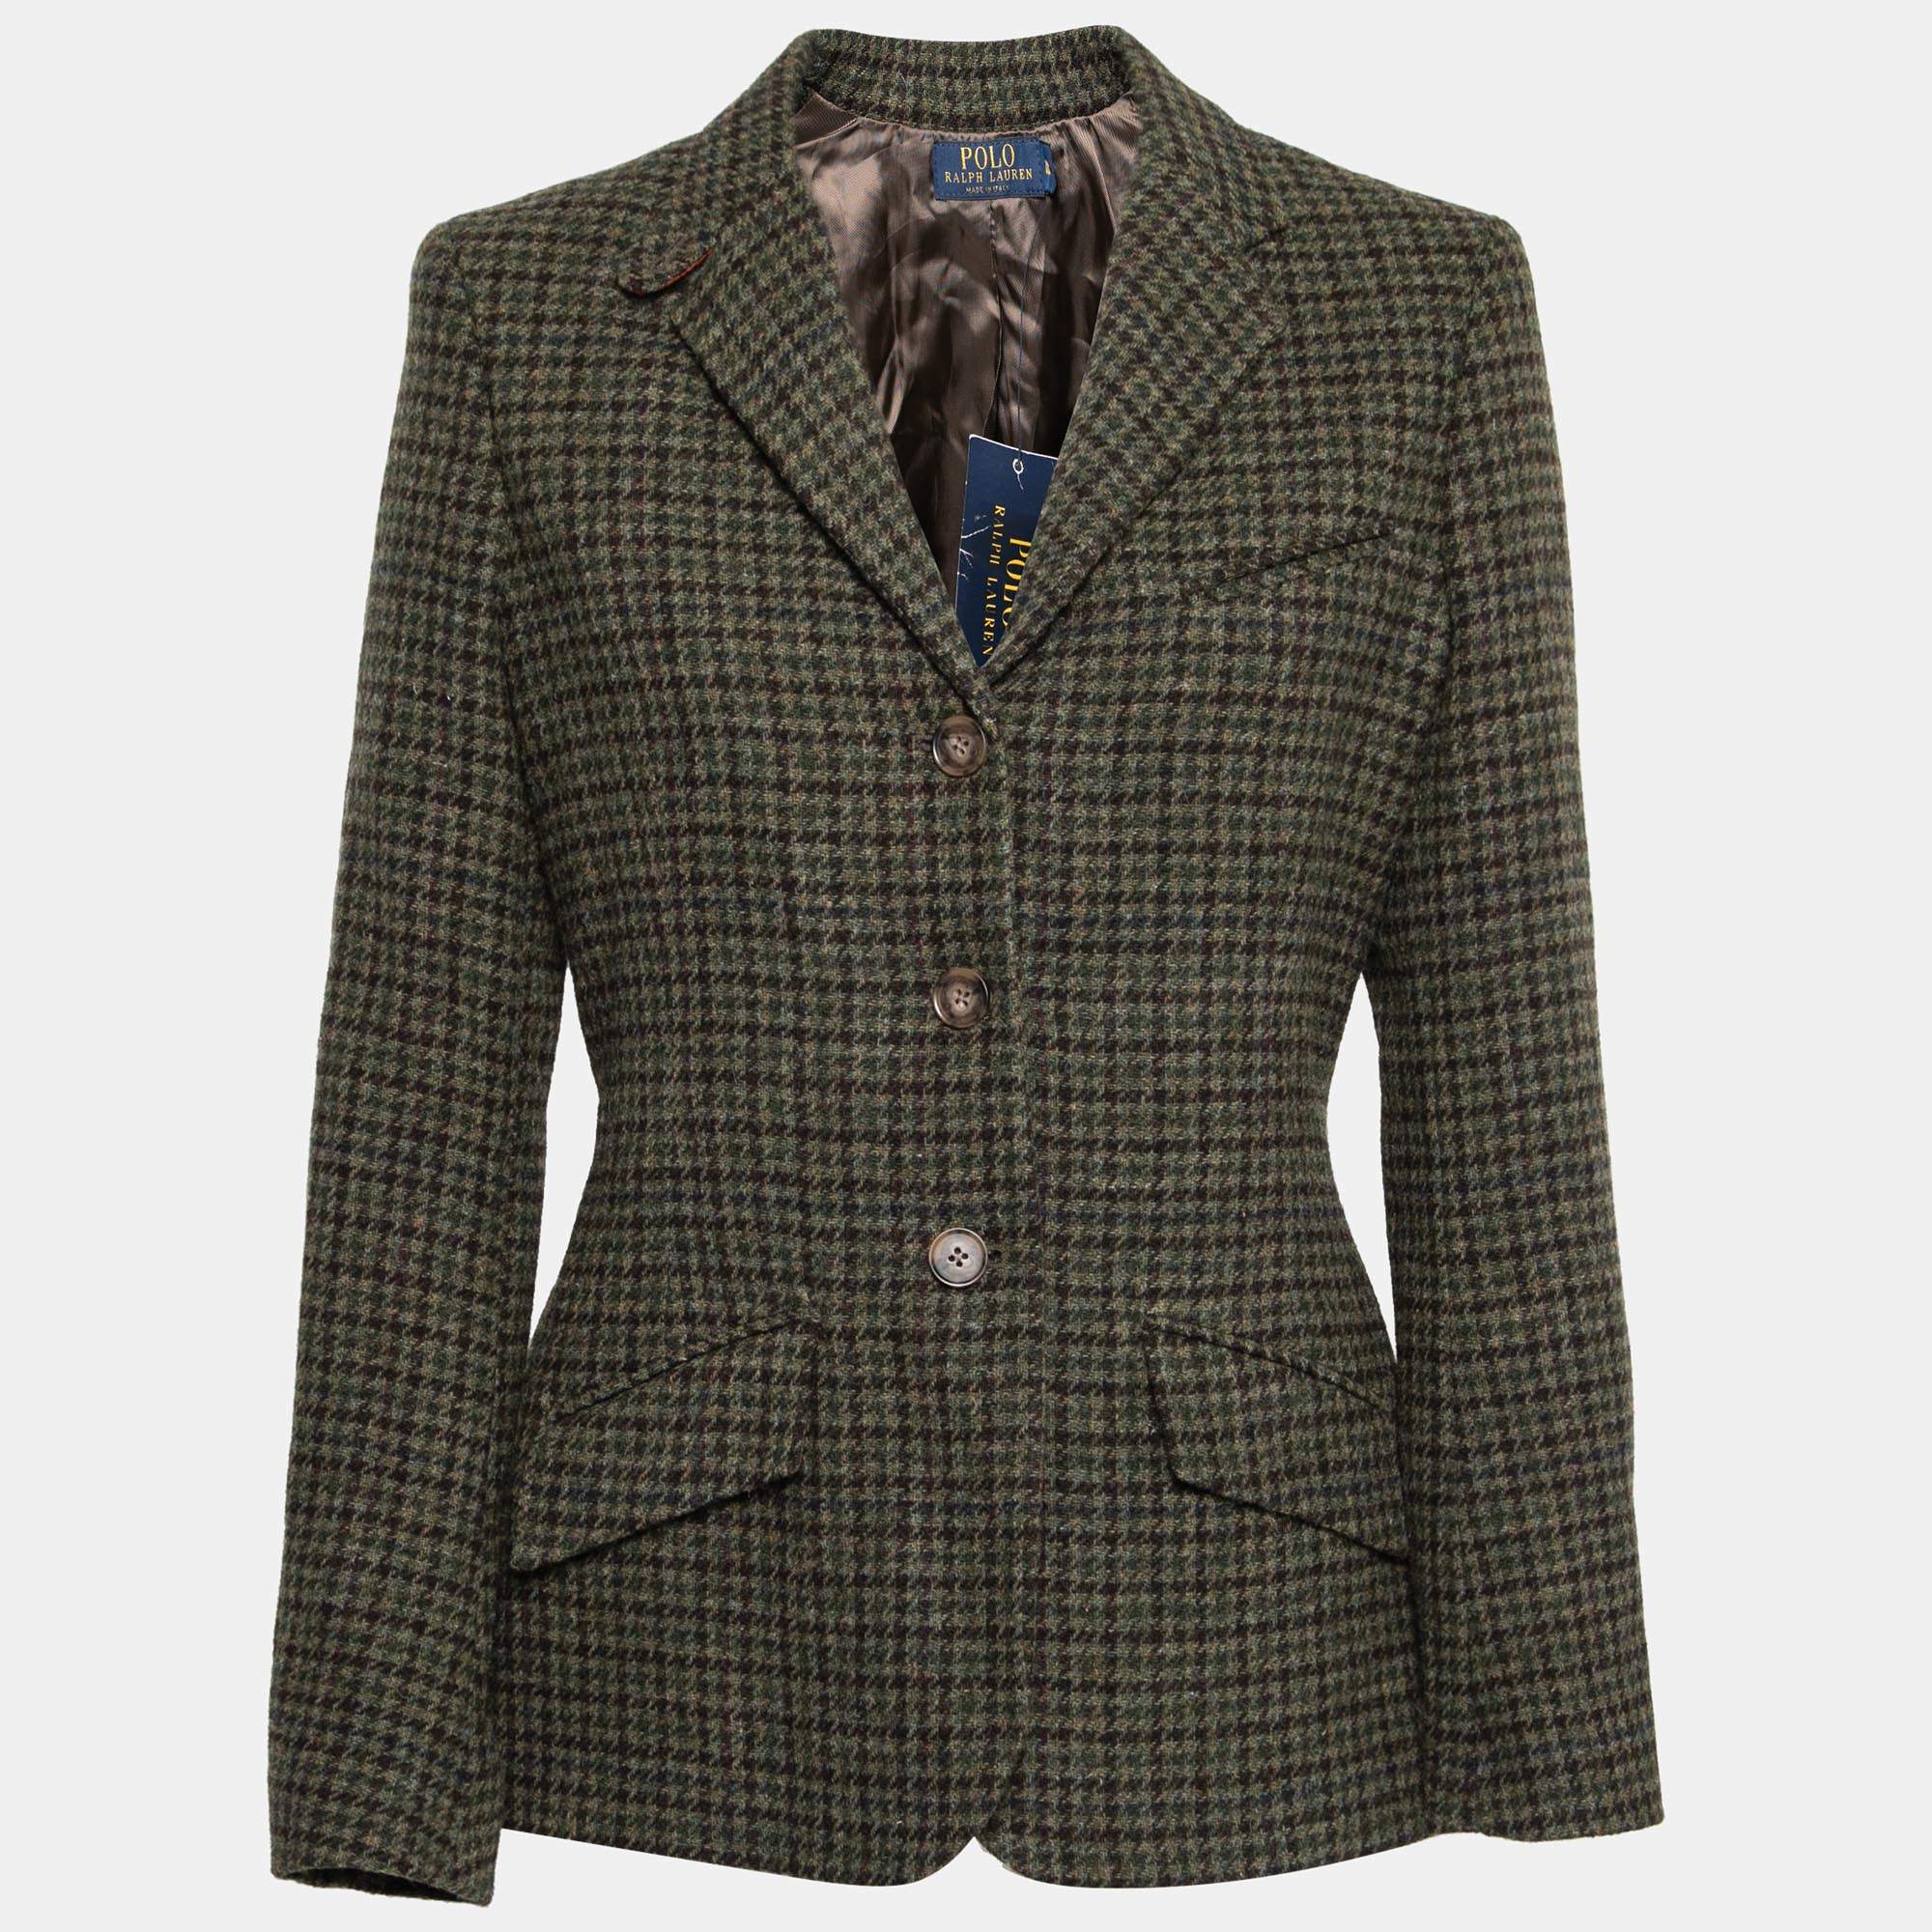 Polo By Ralph Lauren Olive Green Checked Tweed Jacket L